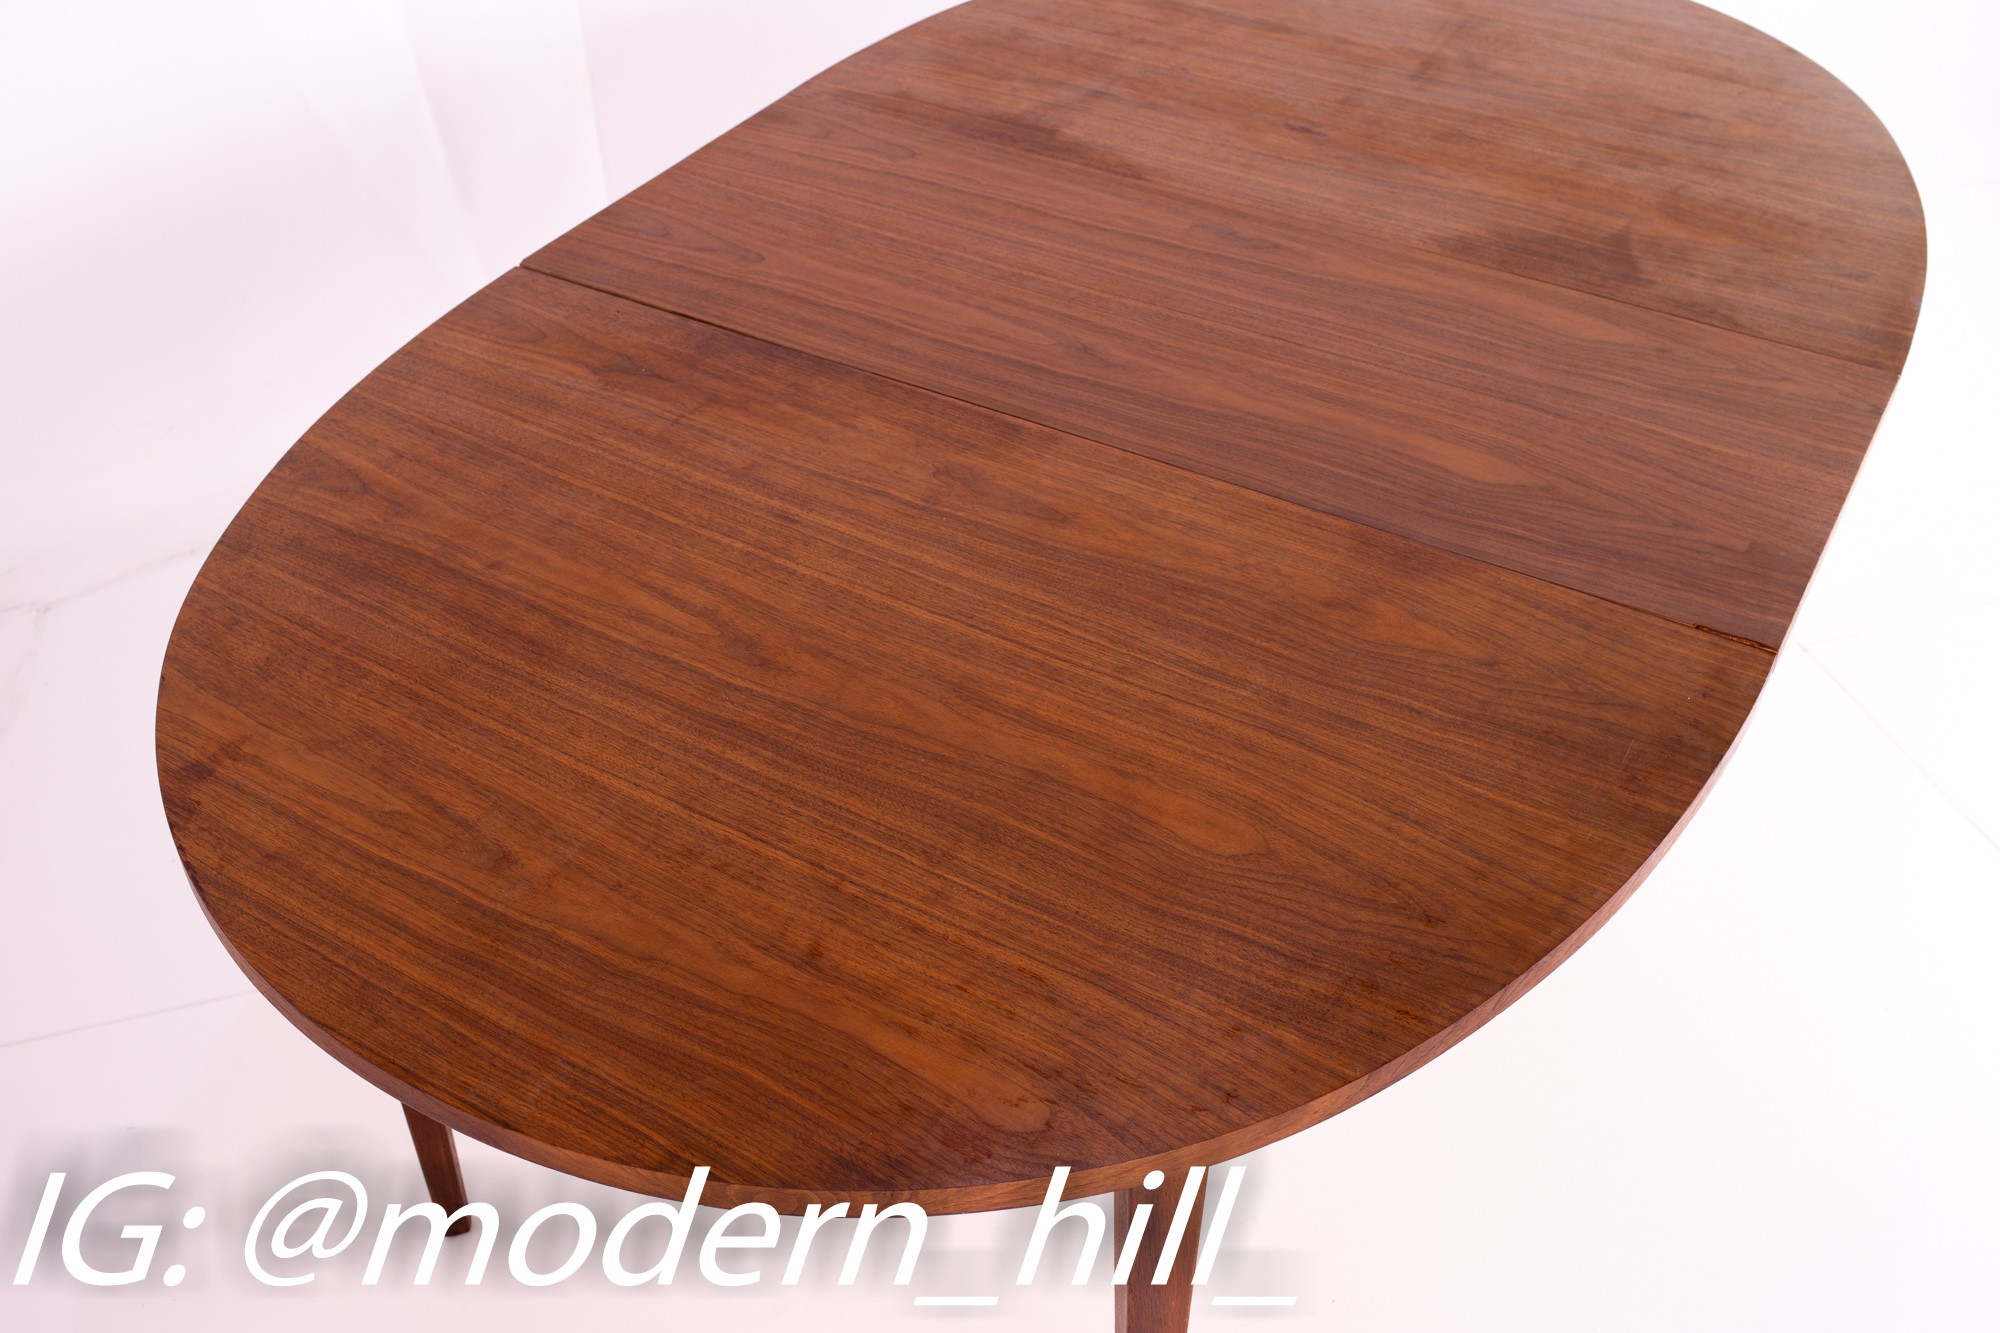 Dillingham Mid Century Round Expanding Walnut Dining Table with 2 Leaves